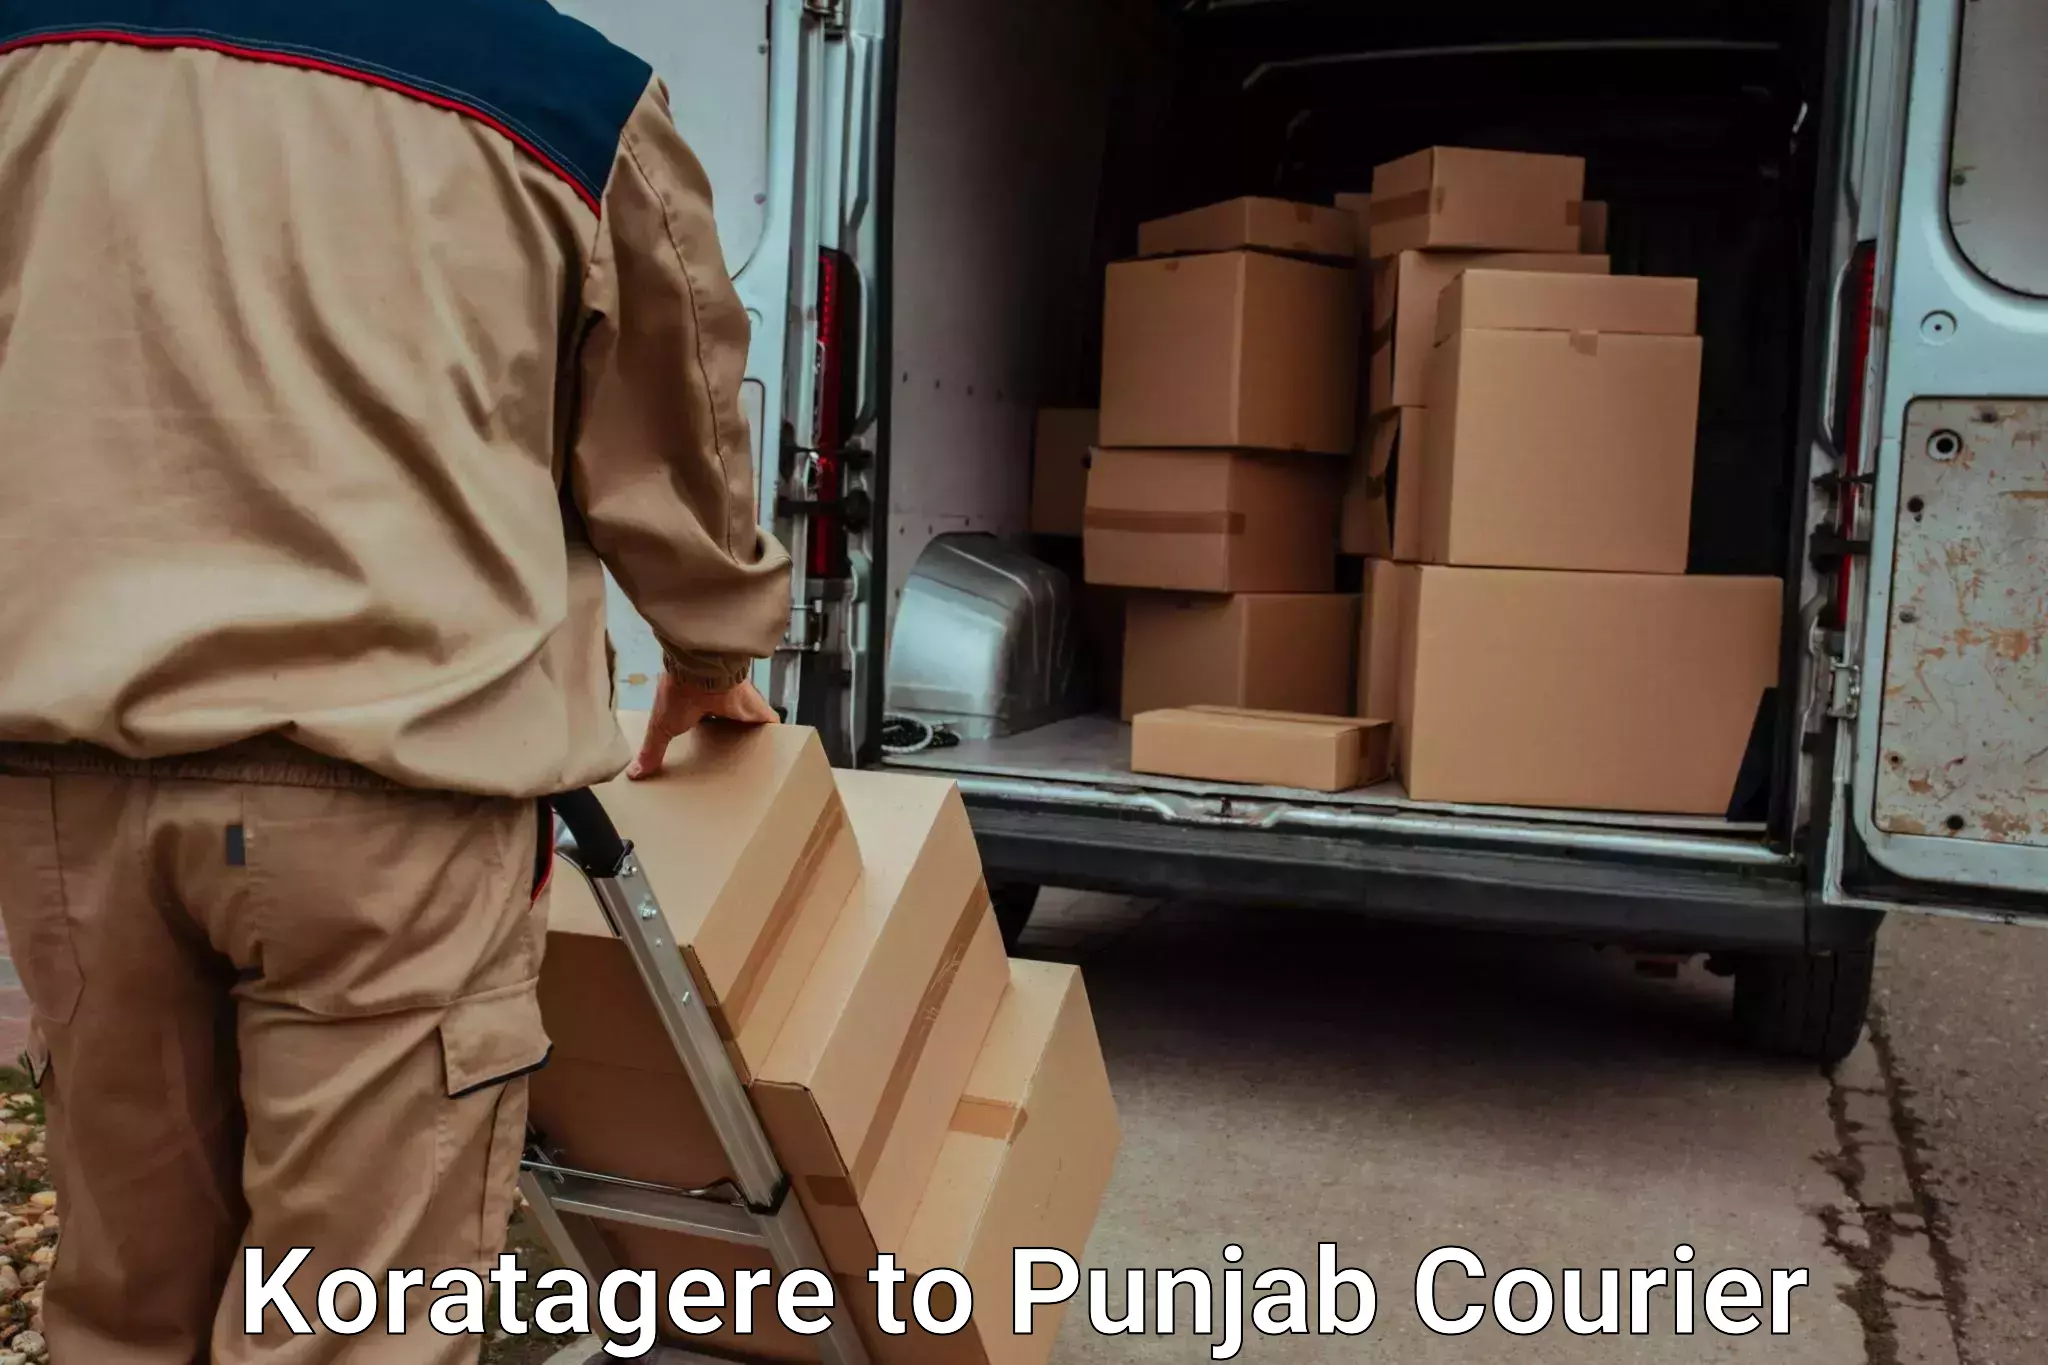 Luggage transport consulting Koratagere to Faridkot